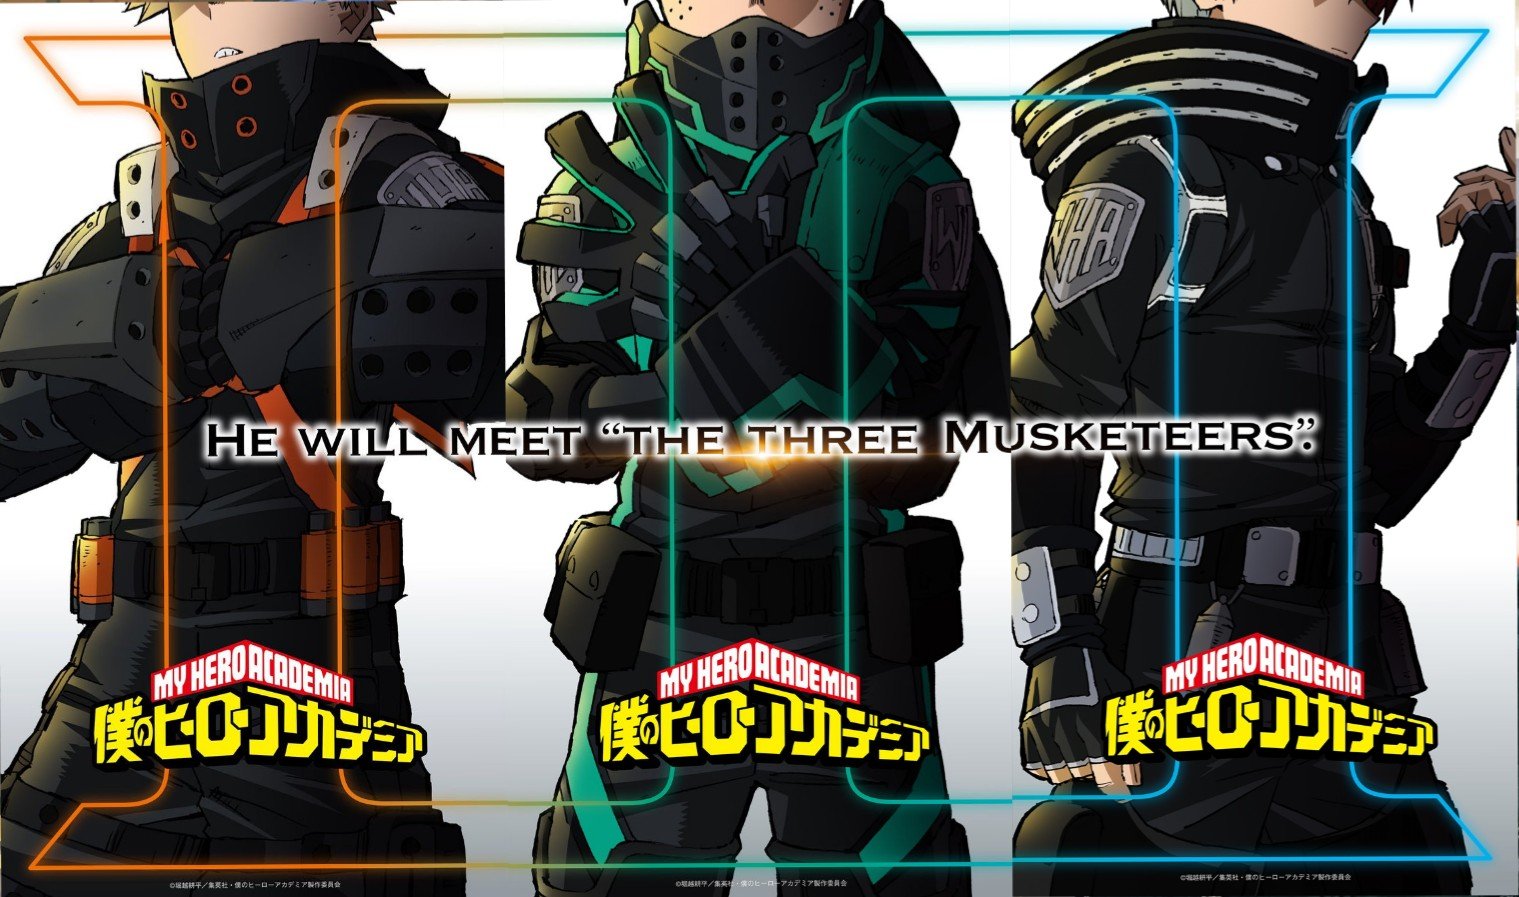 My Hero Academia releases surprising teaser for new movie, declaration of Three Musketeers